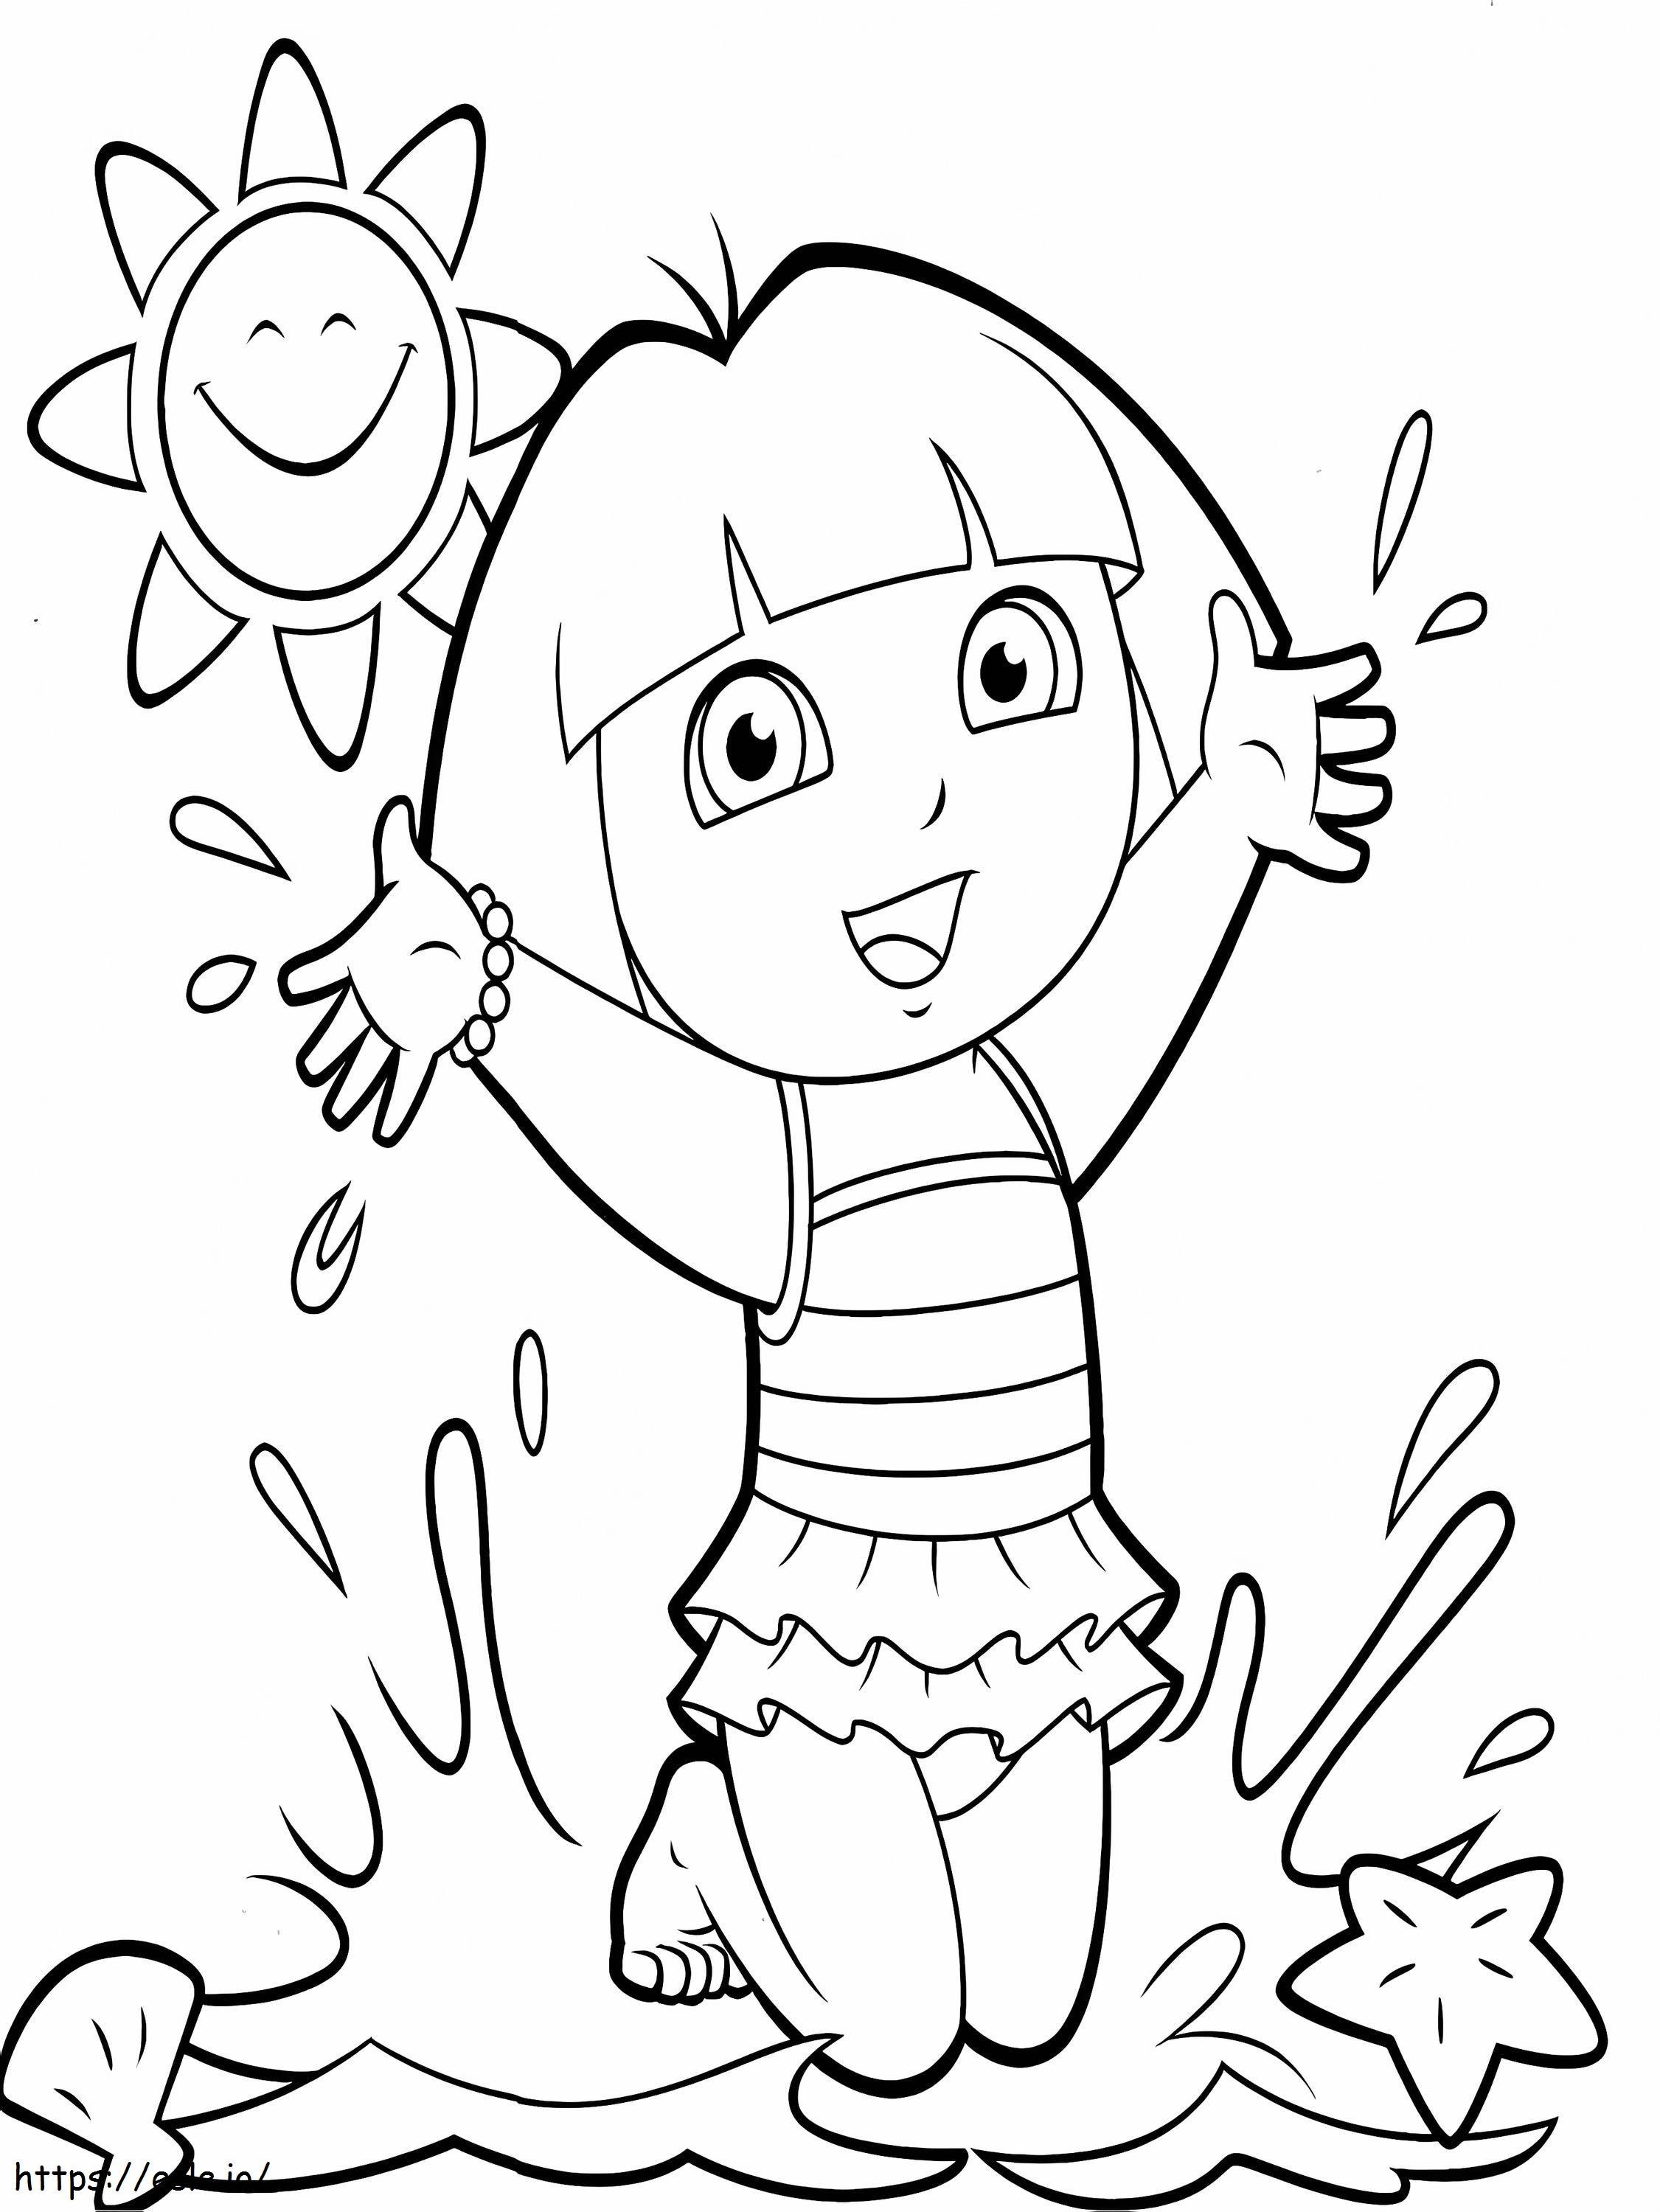  Happy Birthday Dora The Explorer Explorer Drawing At Getdrawingscom Free For Personal Coloring Explorer Dora Happy Birthday Pages The ausmalbilder